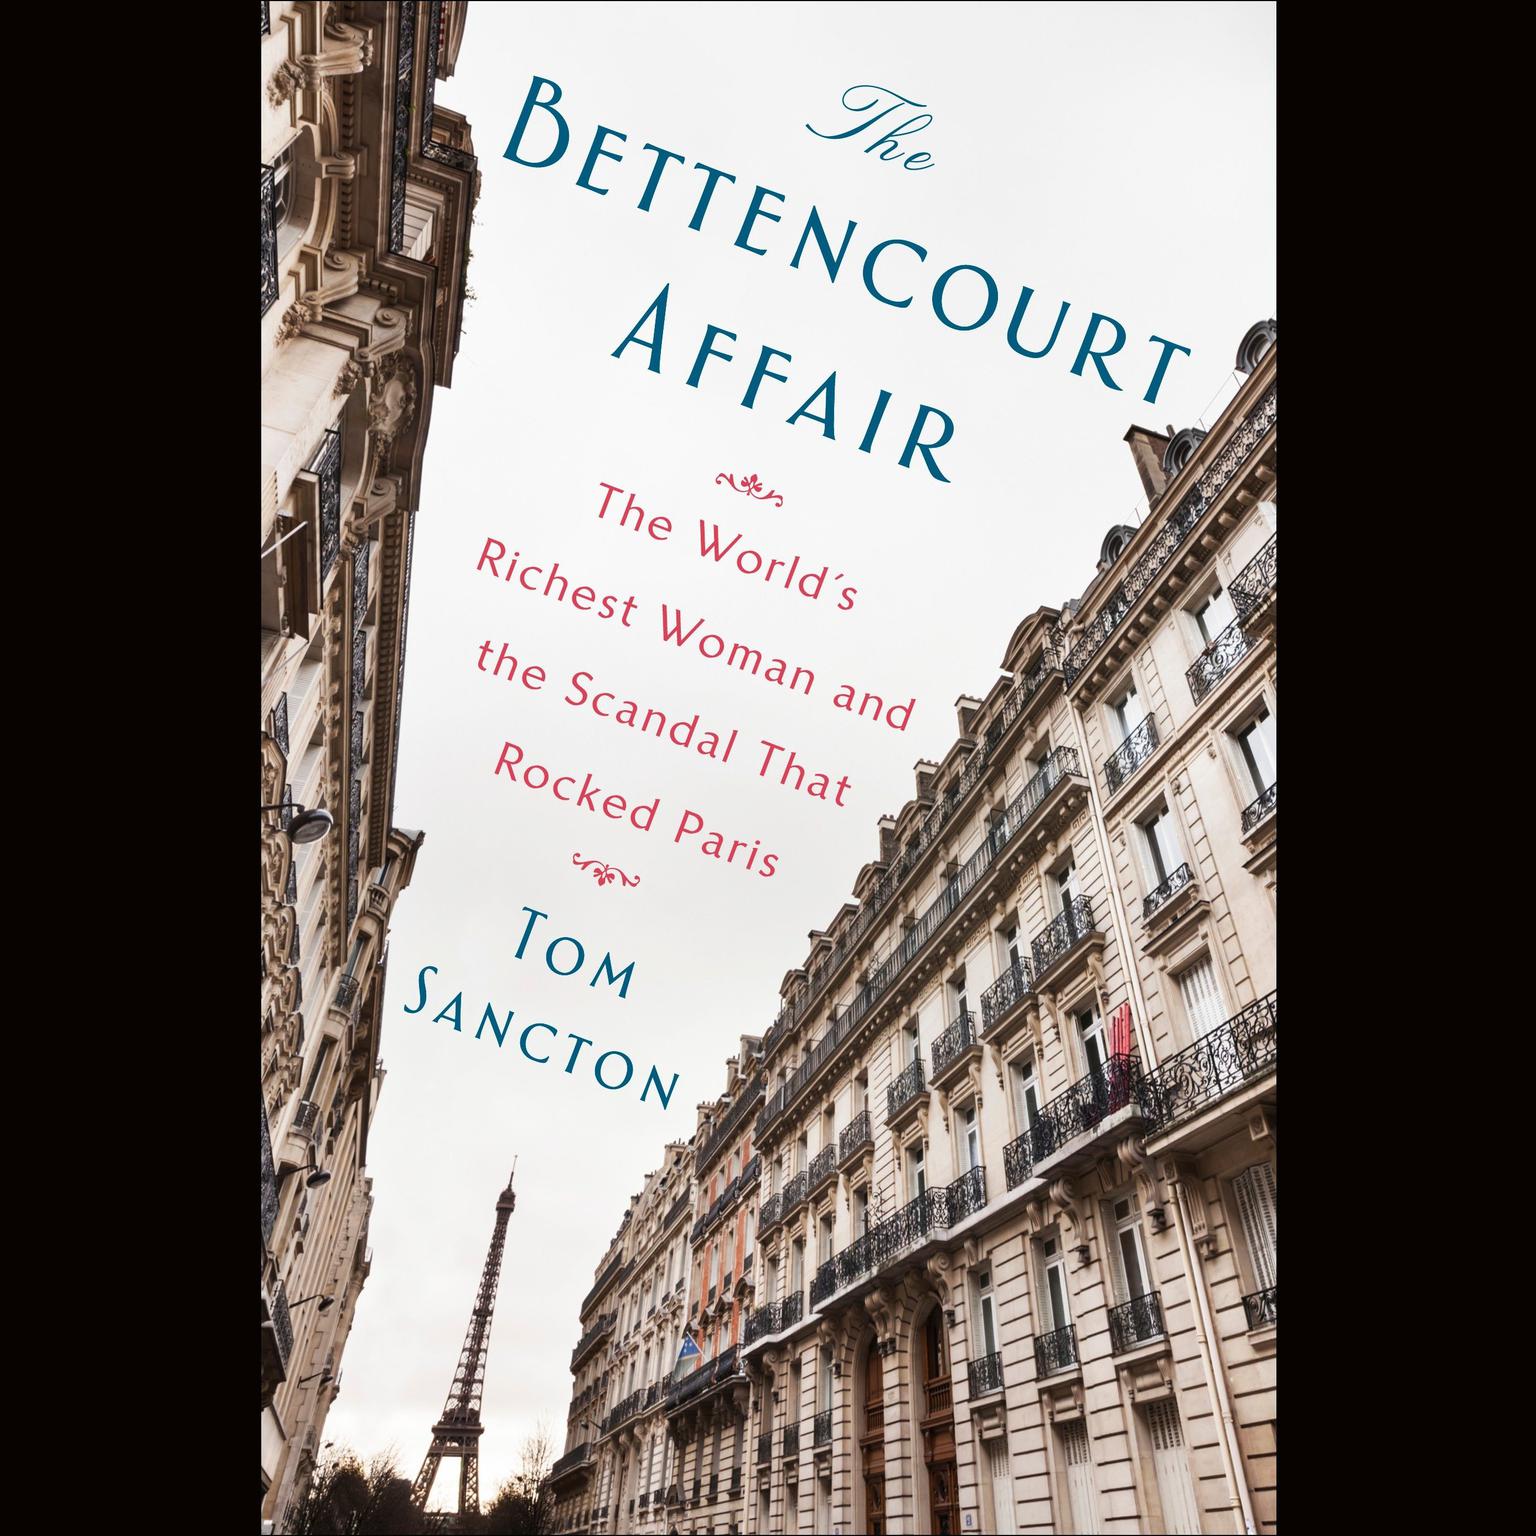 The Bettencourt Affair: The Worlds Richest Woman and the Scandal That Rocked Paris (t) Audiobook, by Tom Sancton